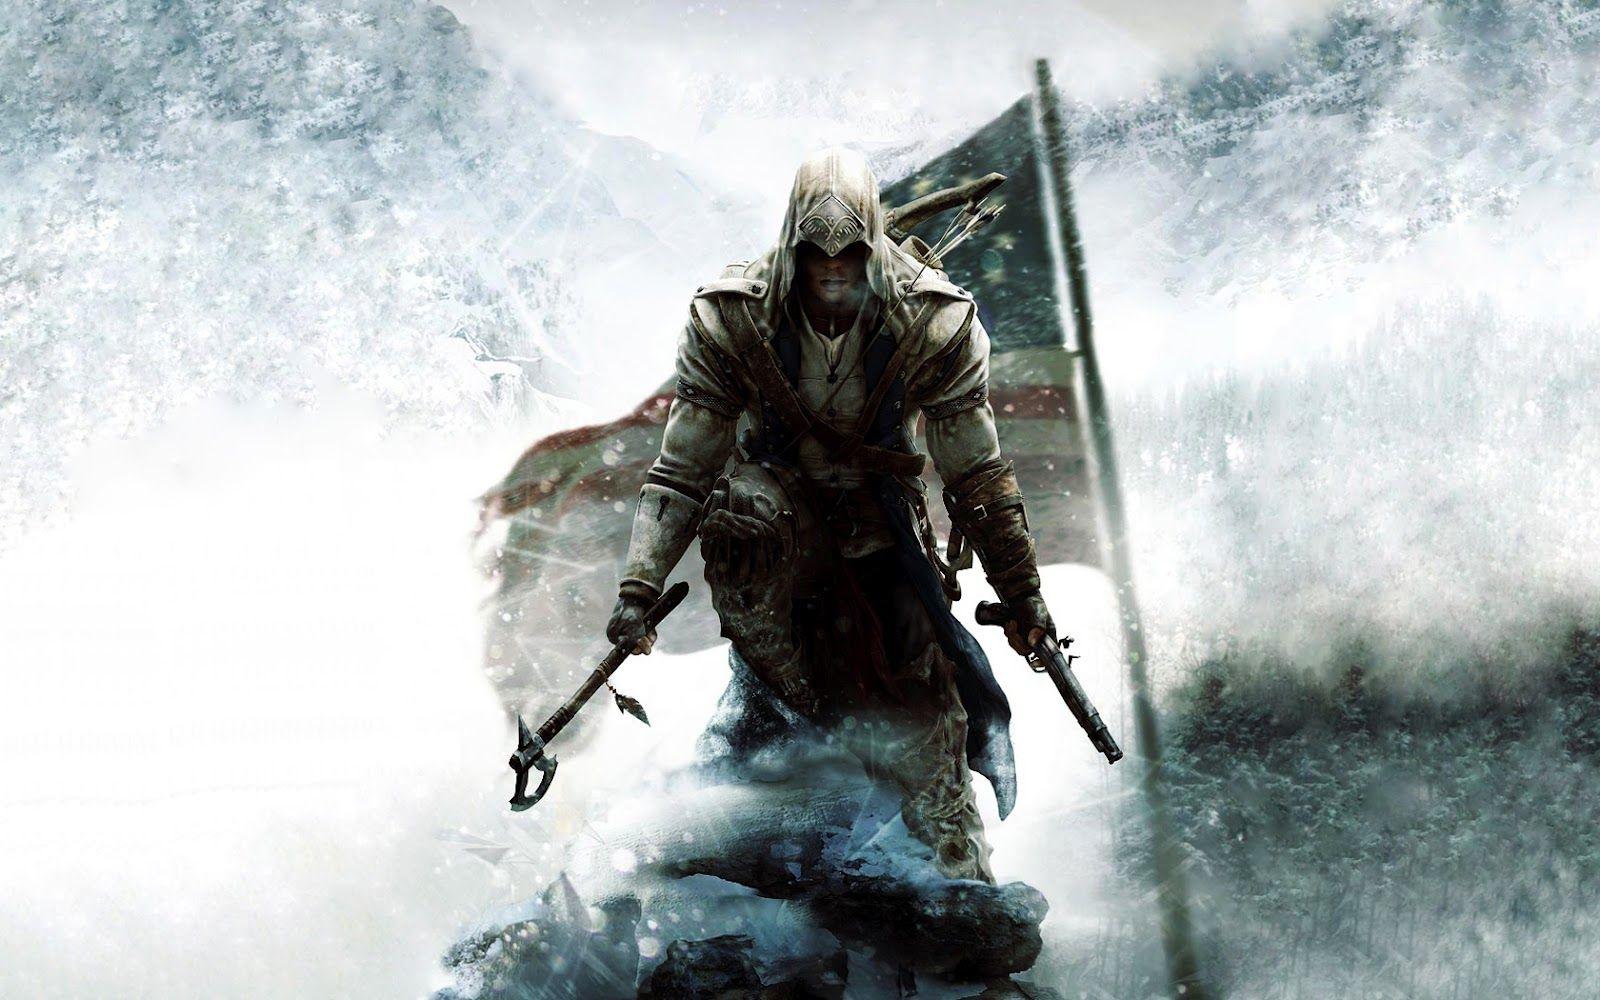 Central Wallpaper: Assassin's Creed III New Game HD Wallpaper